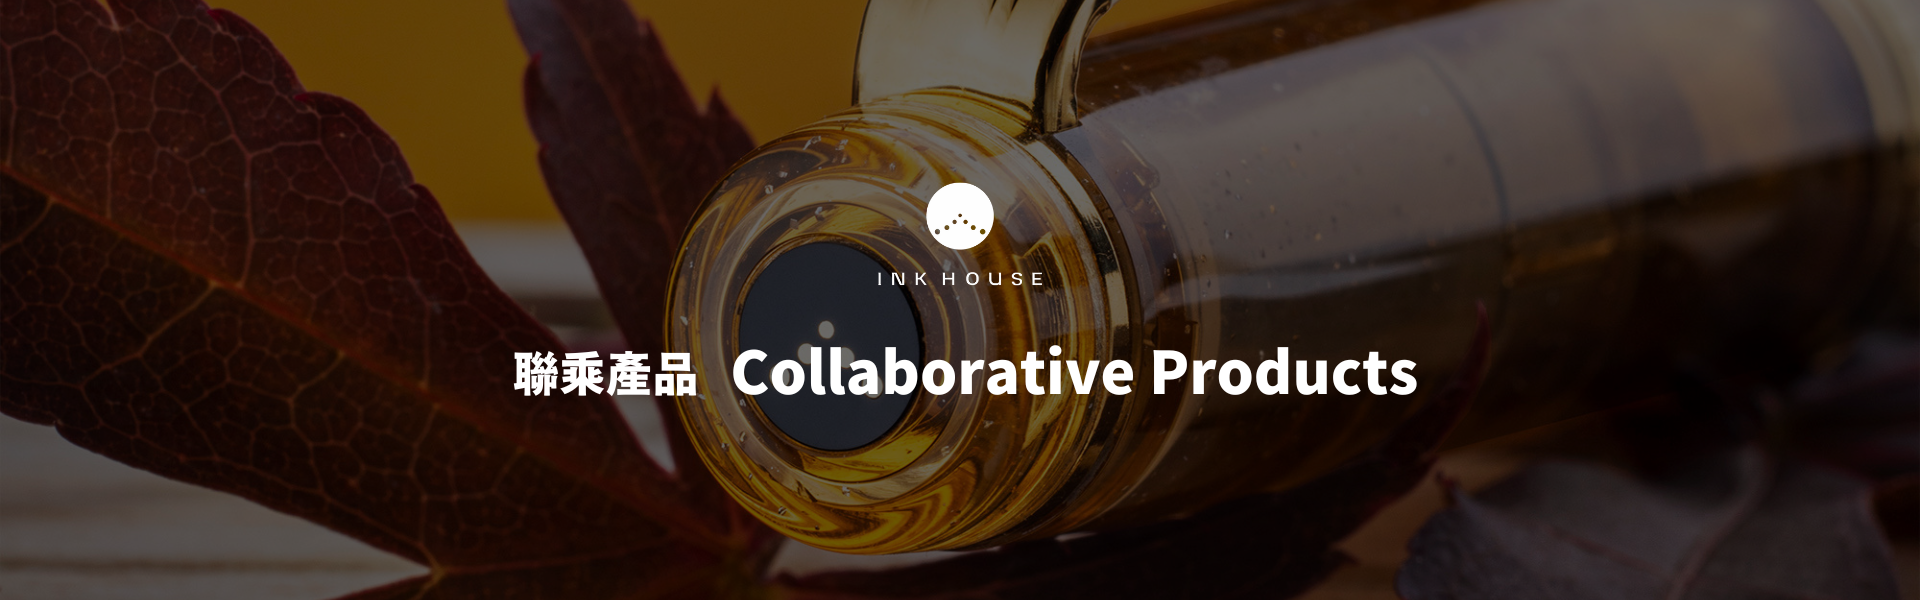 Ink House Collaborative Products 聯乘產品